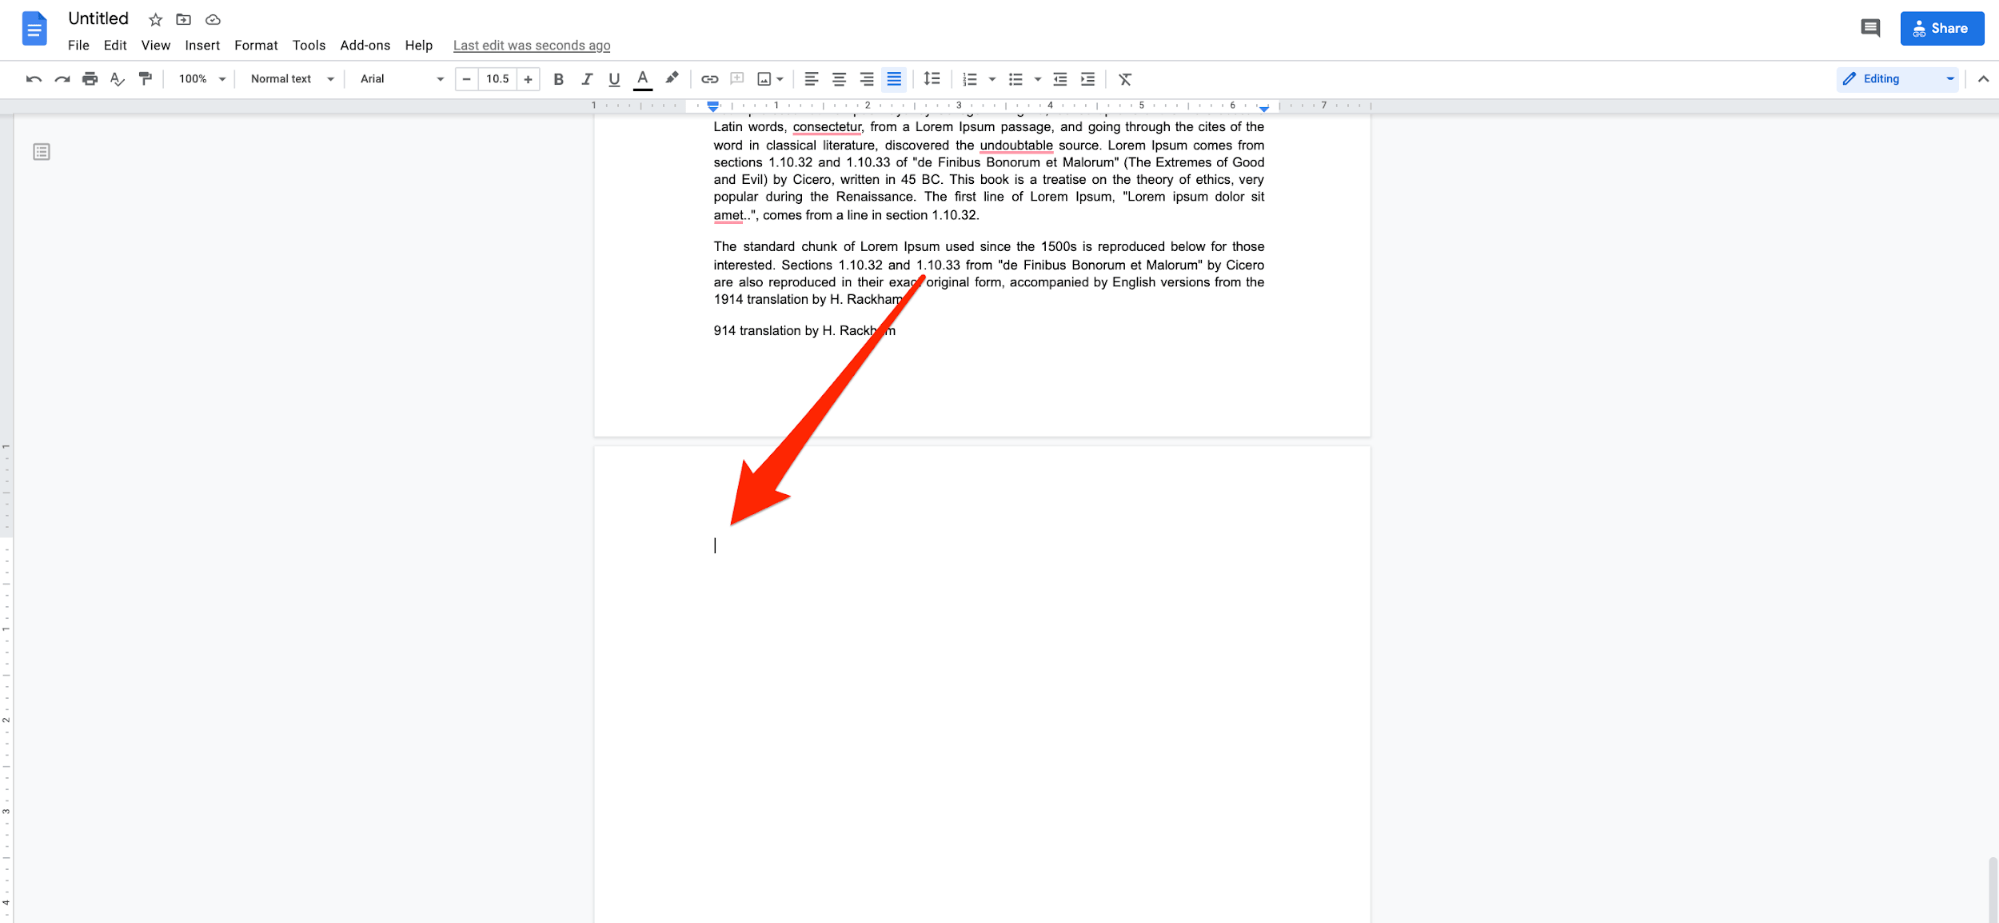 In Google Docs, how do I delete a page?